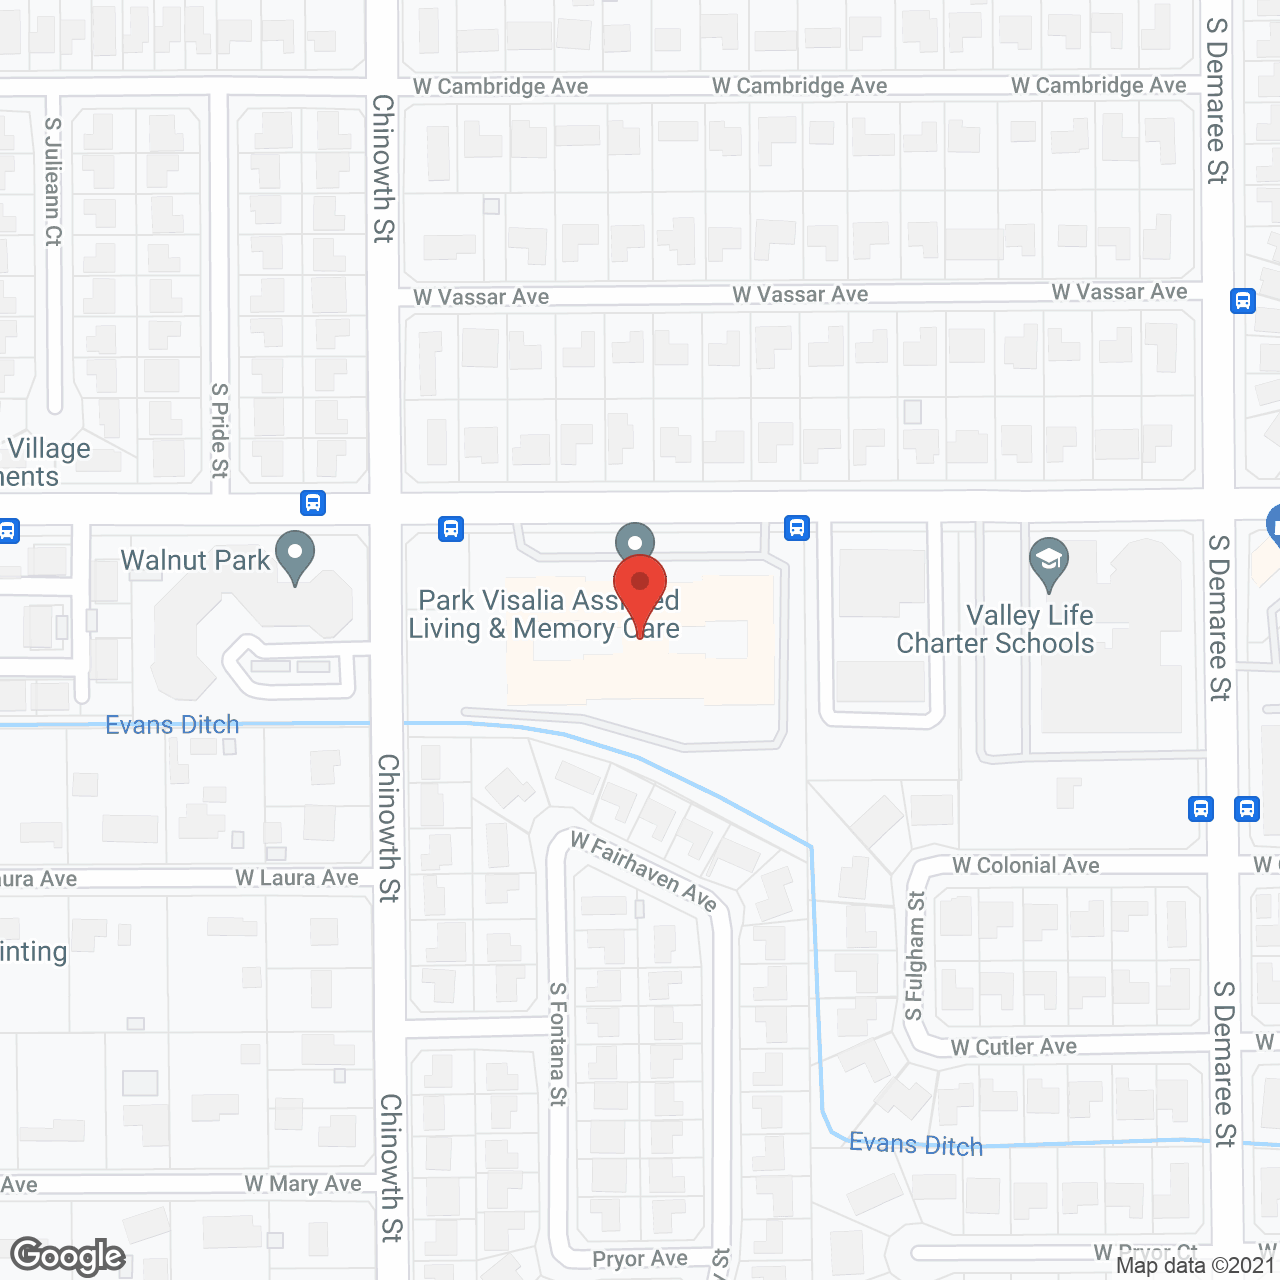 Park Visalia Assisted Living & Memory Care in google map